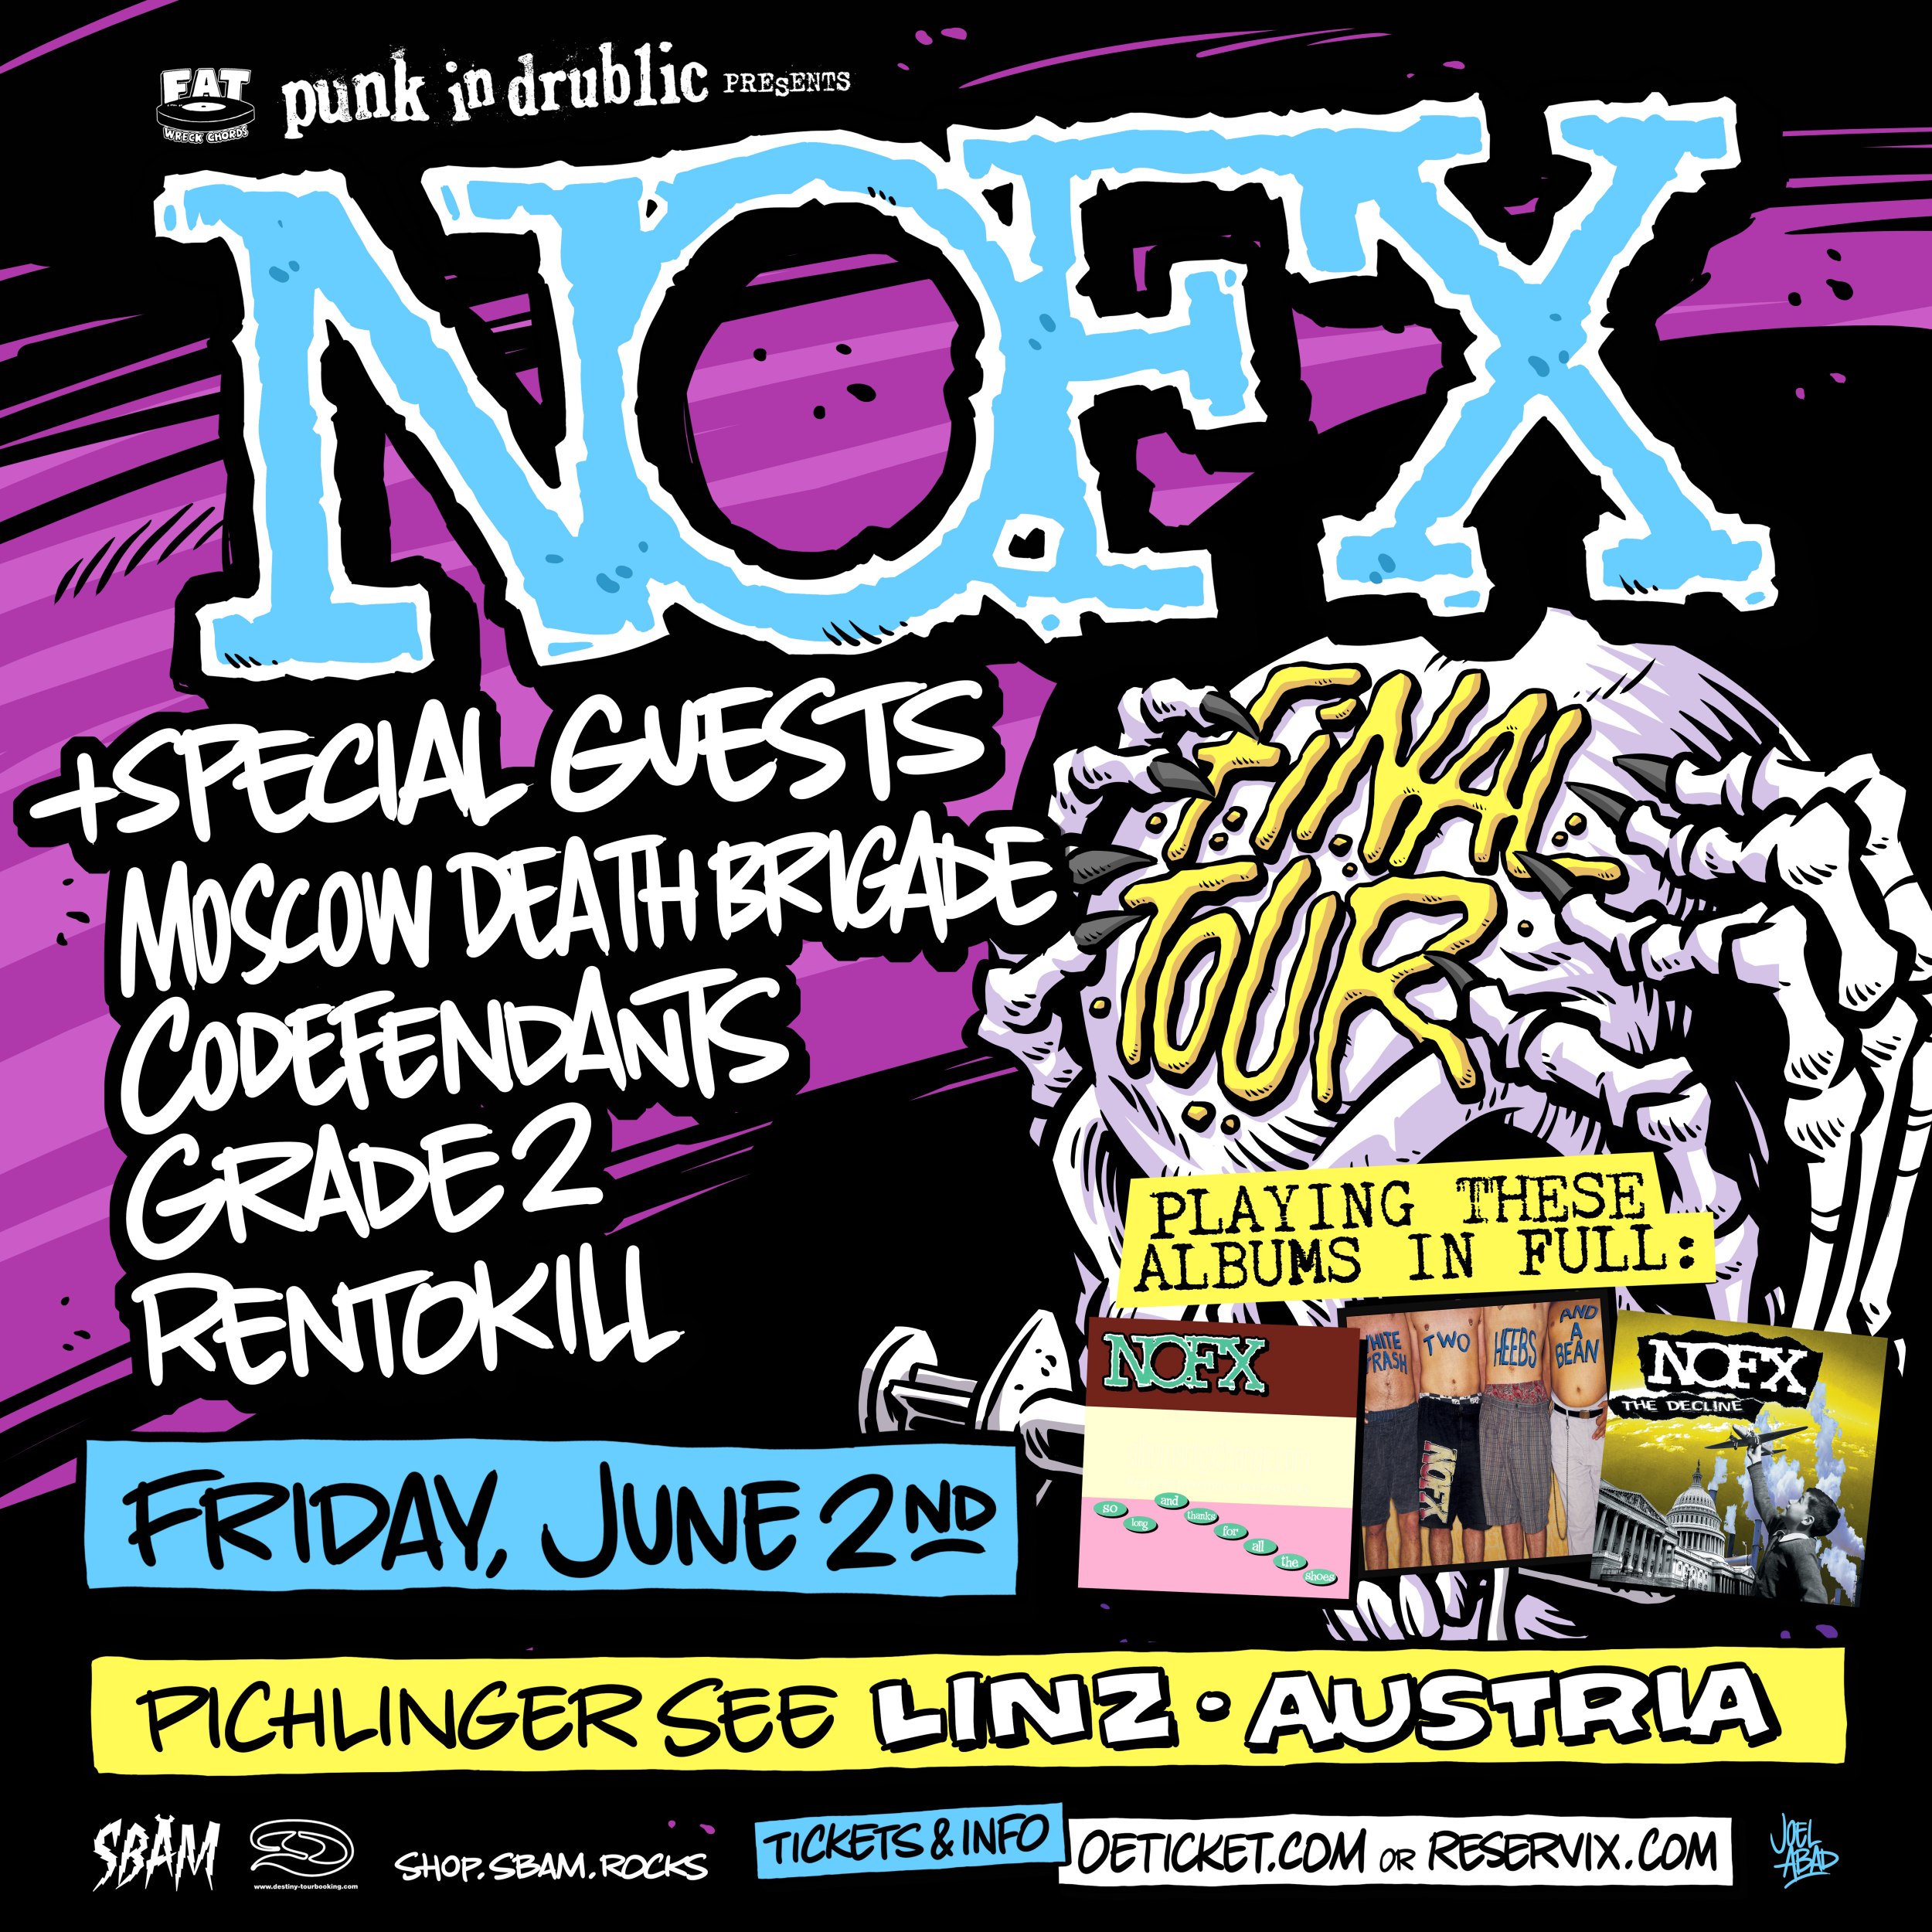 NOFX REVEAL LINEUP FOR SHOW IN LINZ